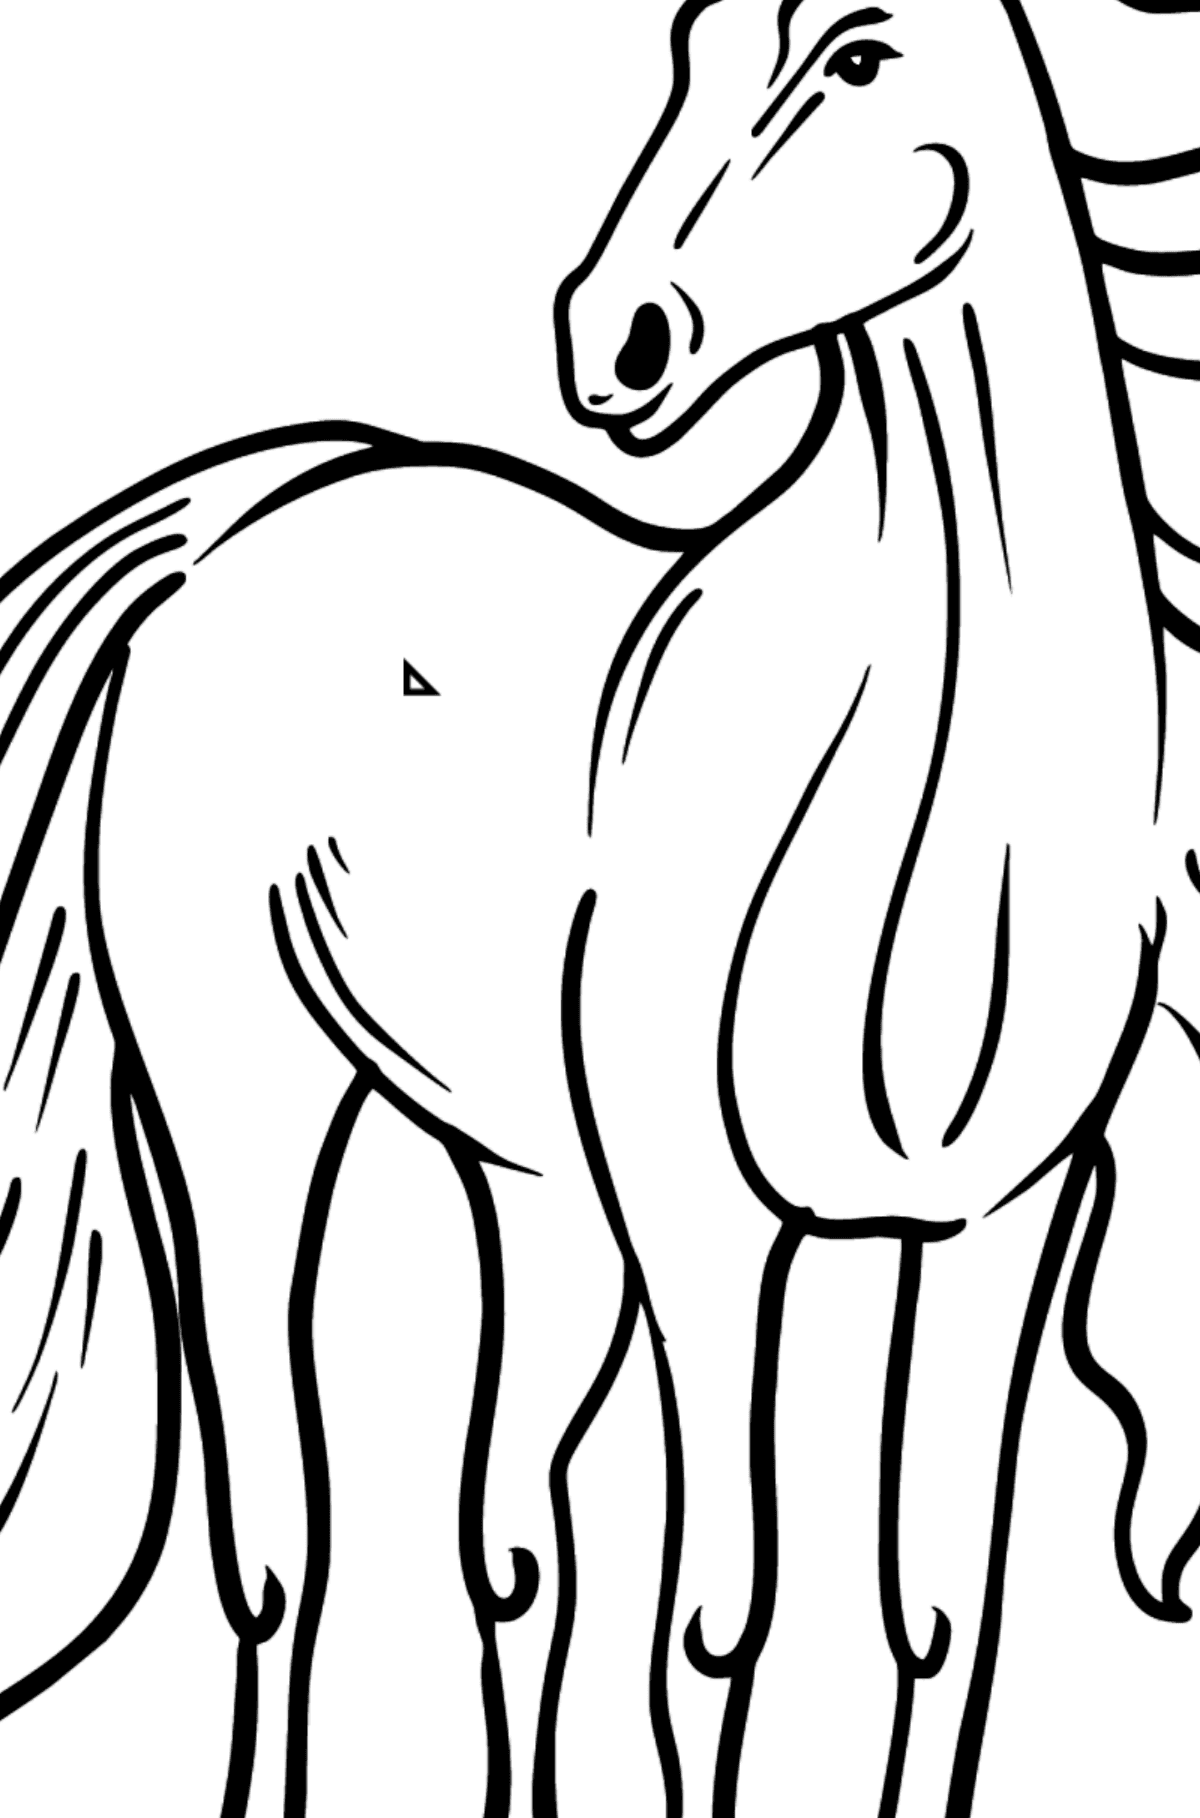 Horse coloring page - Coloring by Symbols and Geometric Shapes for Kids